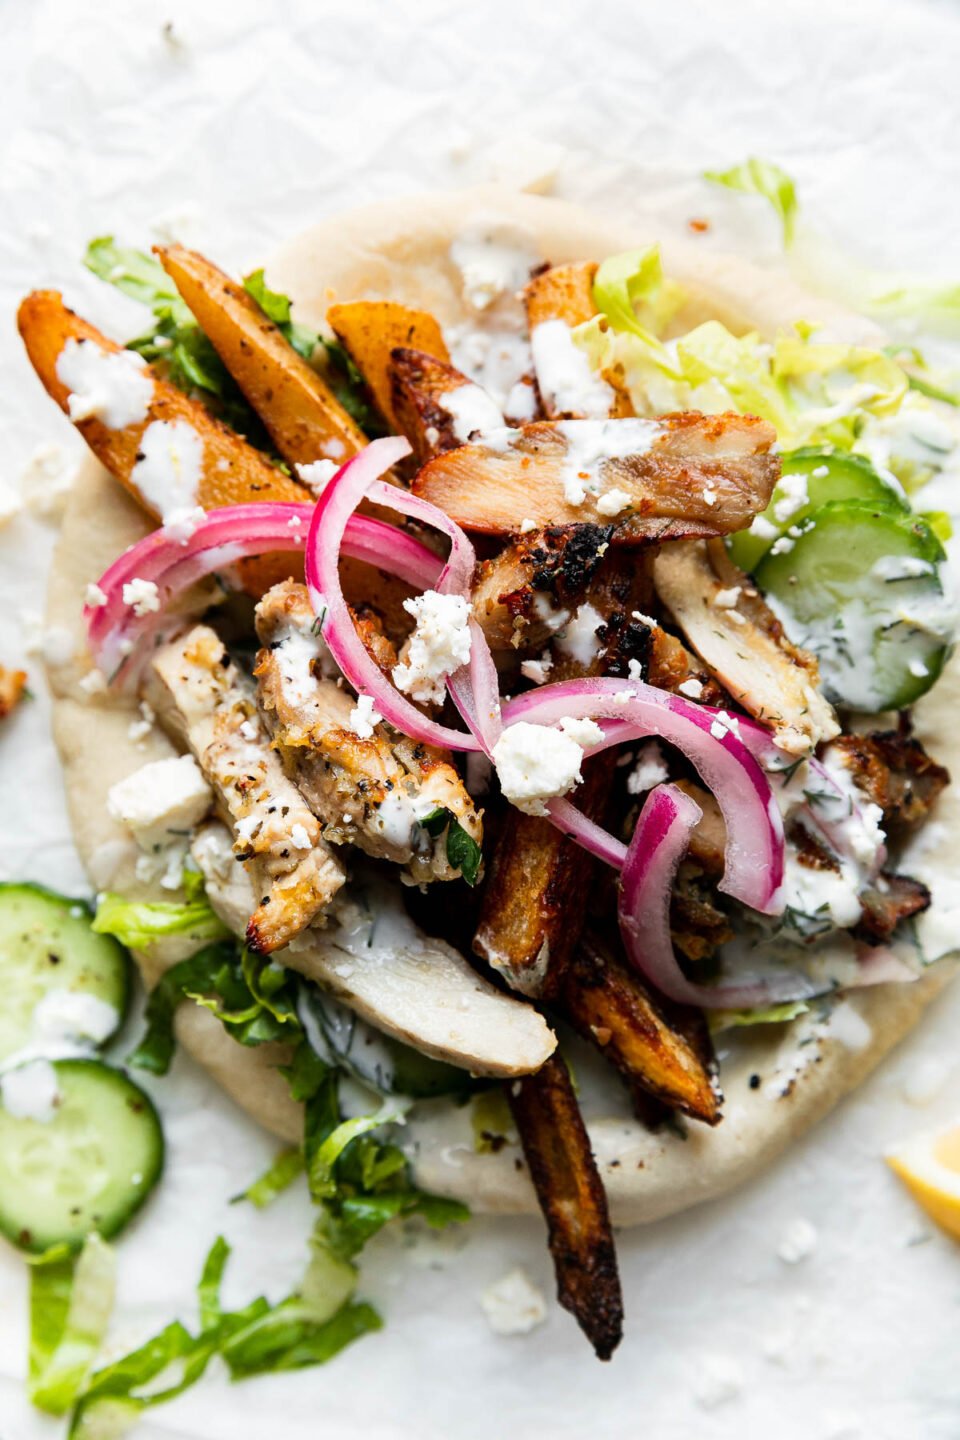 An overhead shot of an assembled Greek Chicken Pita that rests atop a crumpled sheet of white parchment paper. The pita has been piled high with sliced lemony Greek chicken, oven-roasted Greek fries, shredded lettuce, crumbled feta, sliced cucumber, pickled red onion, and a drizzle of tzatziki-ish herbed yogurt sauce. Surrounding the pita is a few slices of cucumber, a lemon wedge, and crumbled feta. All items sit atop a creamy white textured surface.